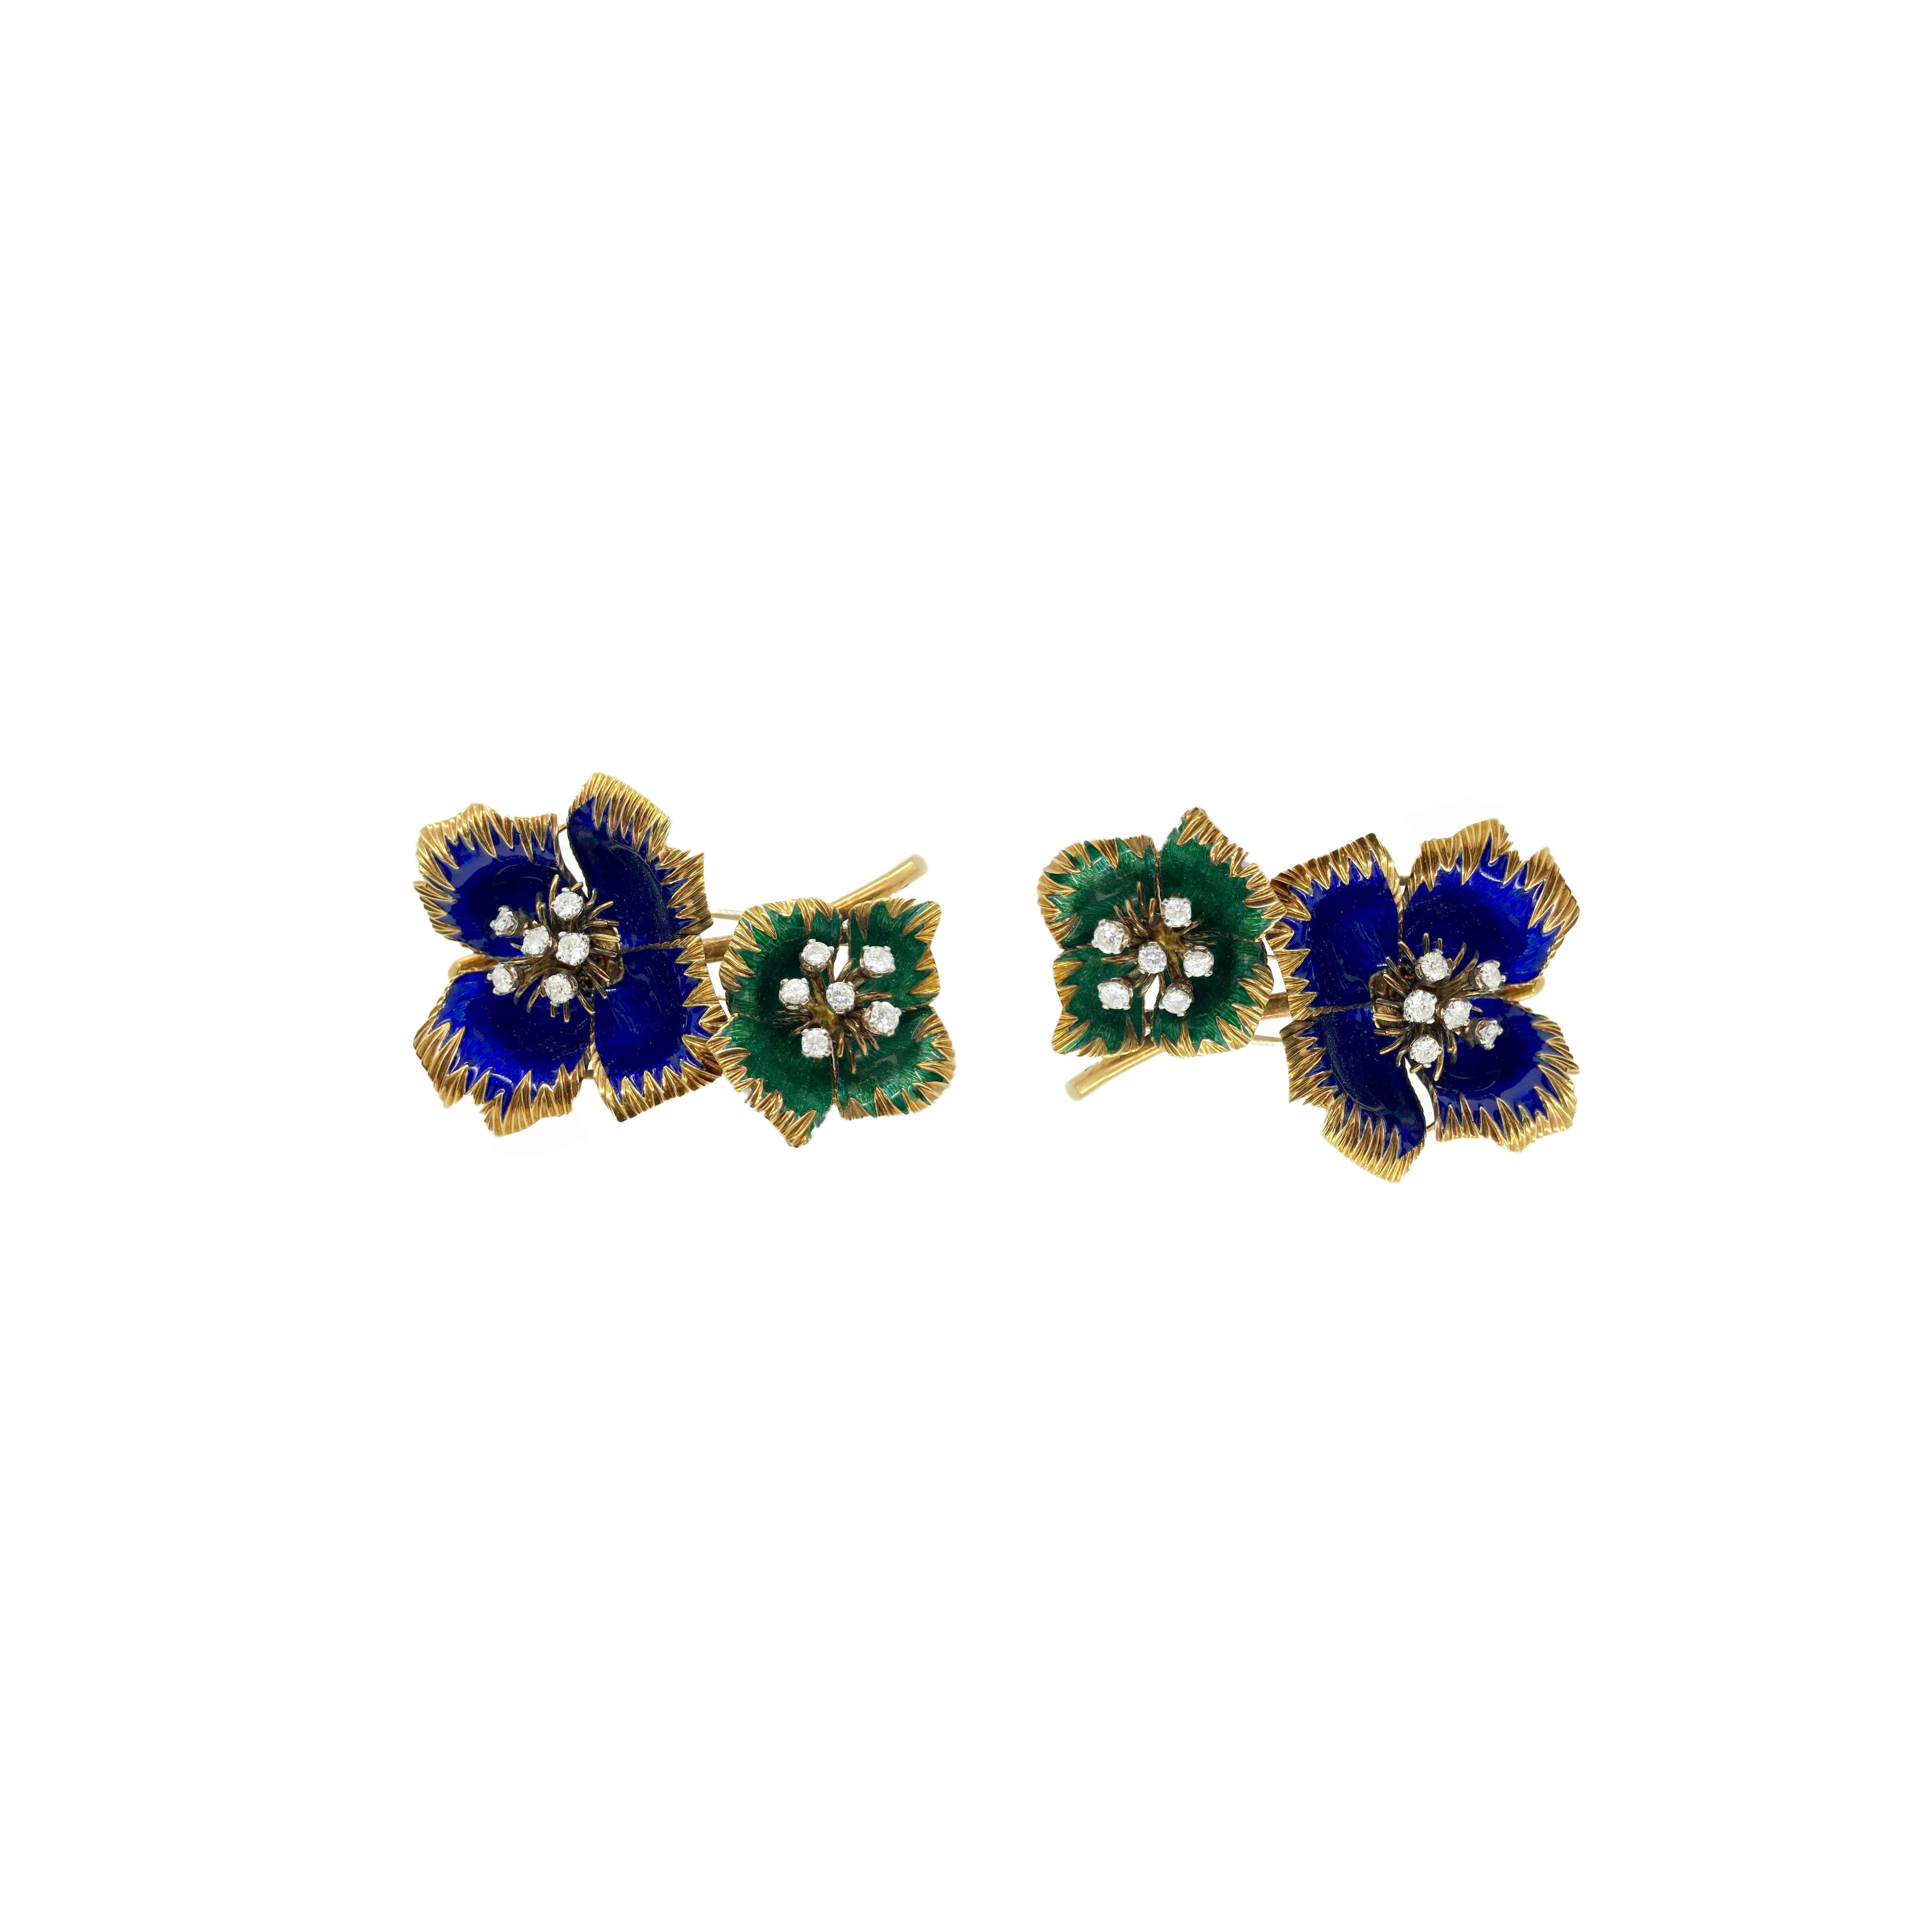 A chic pair of enamel and diamond flower brooches by Van Cleef & Arpels in 18 karat yellow gold. Circa 1960s.